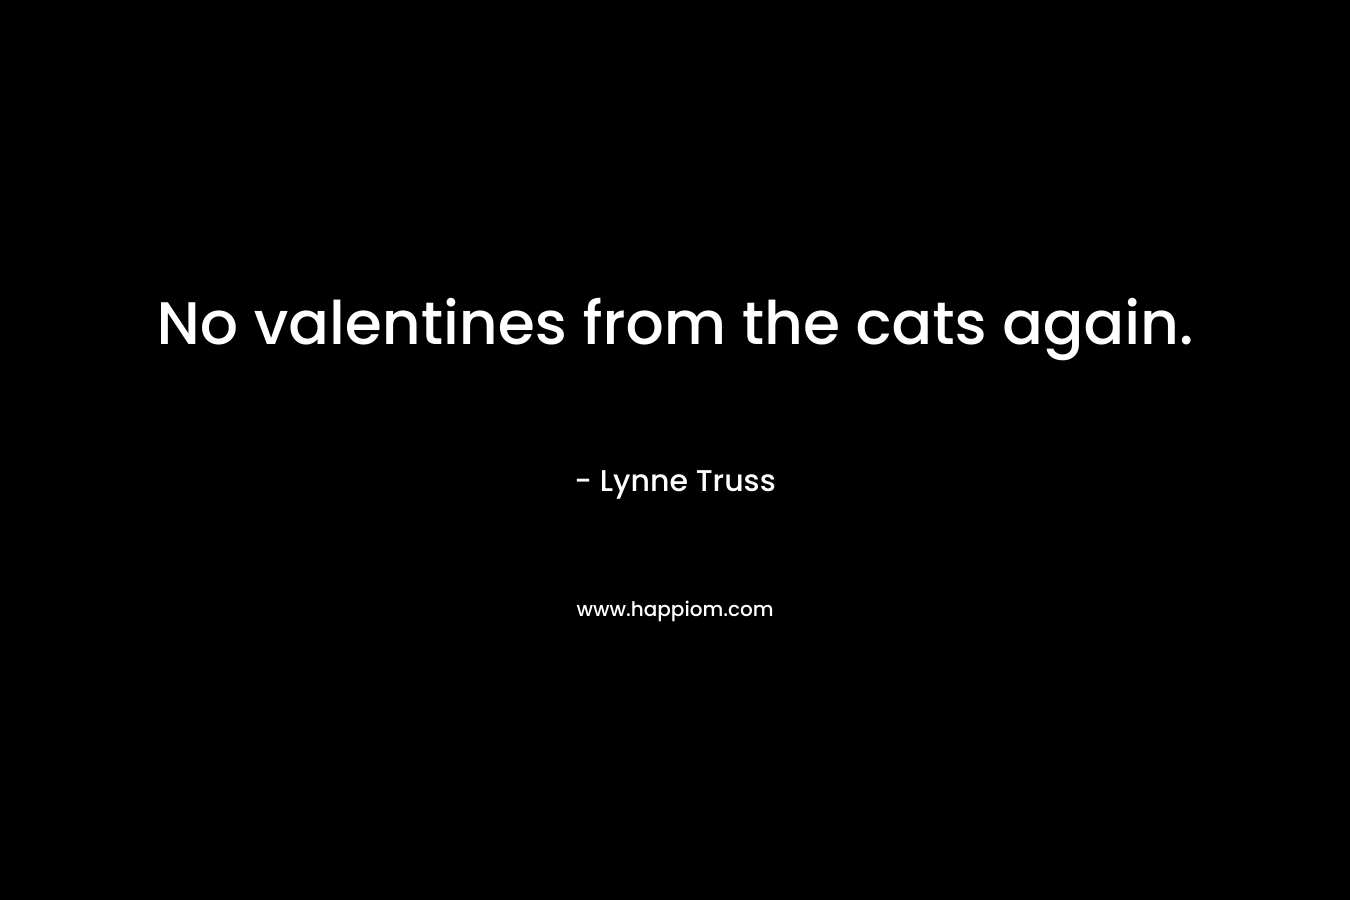 No valentines from the cats again. – Lynne Truss